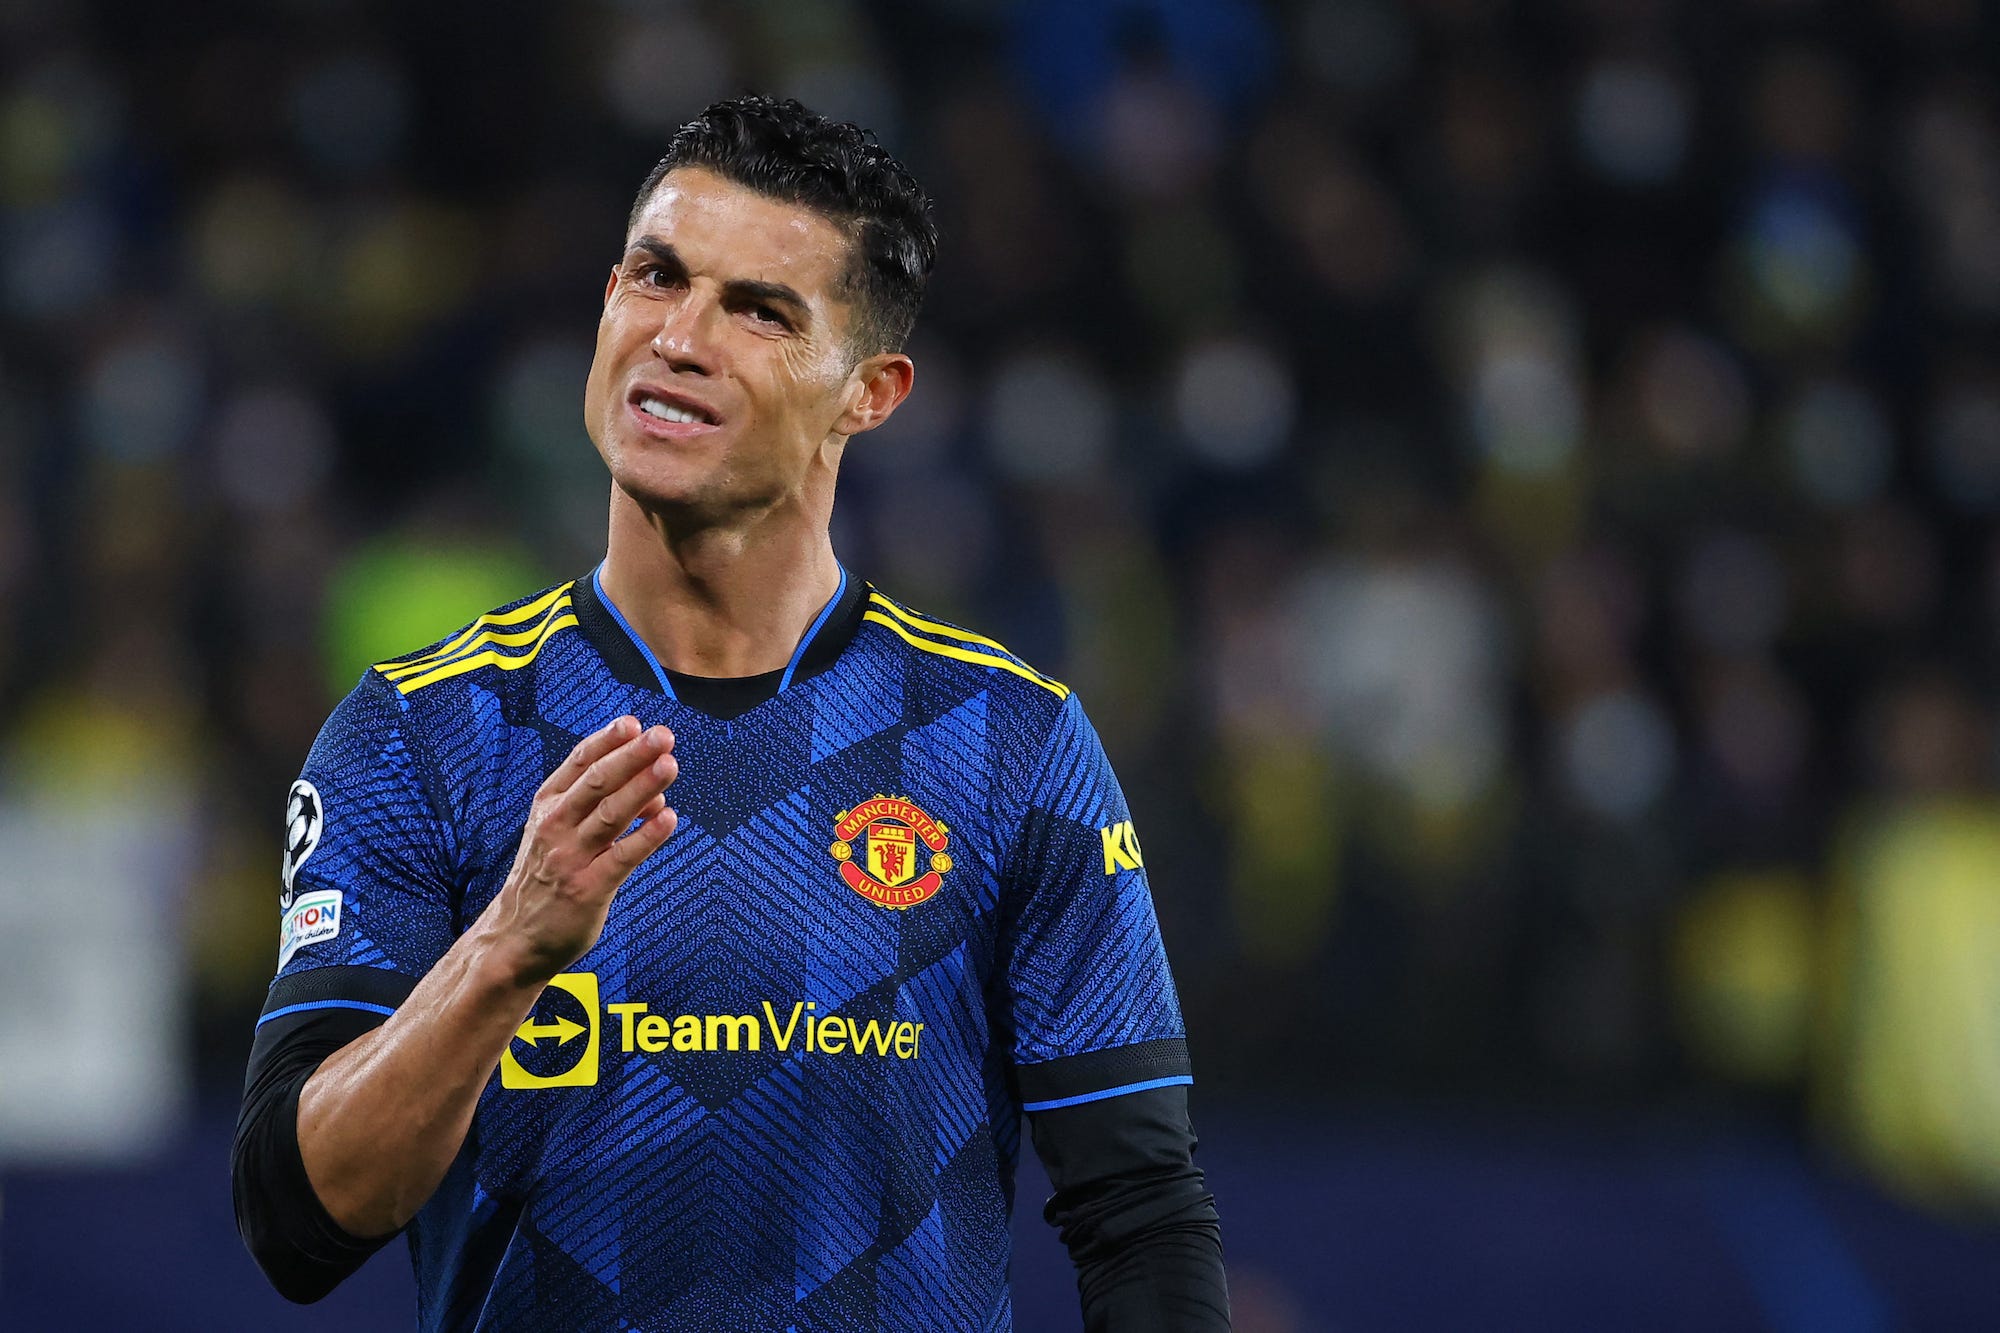 Manchester United's Portuguese forward Cristiano Ronaldo reacts during the UEFA Champions League Group F football match between Villarreal CF and Manchester United, at La Ceramica stadium